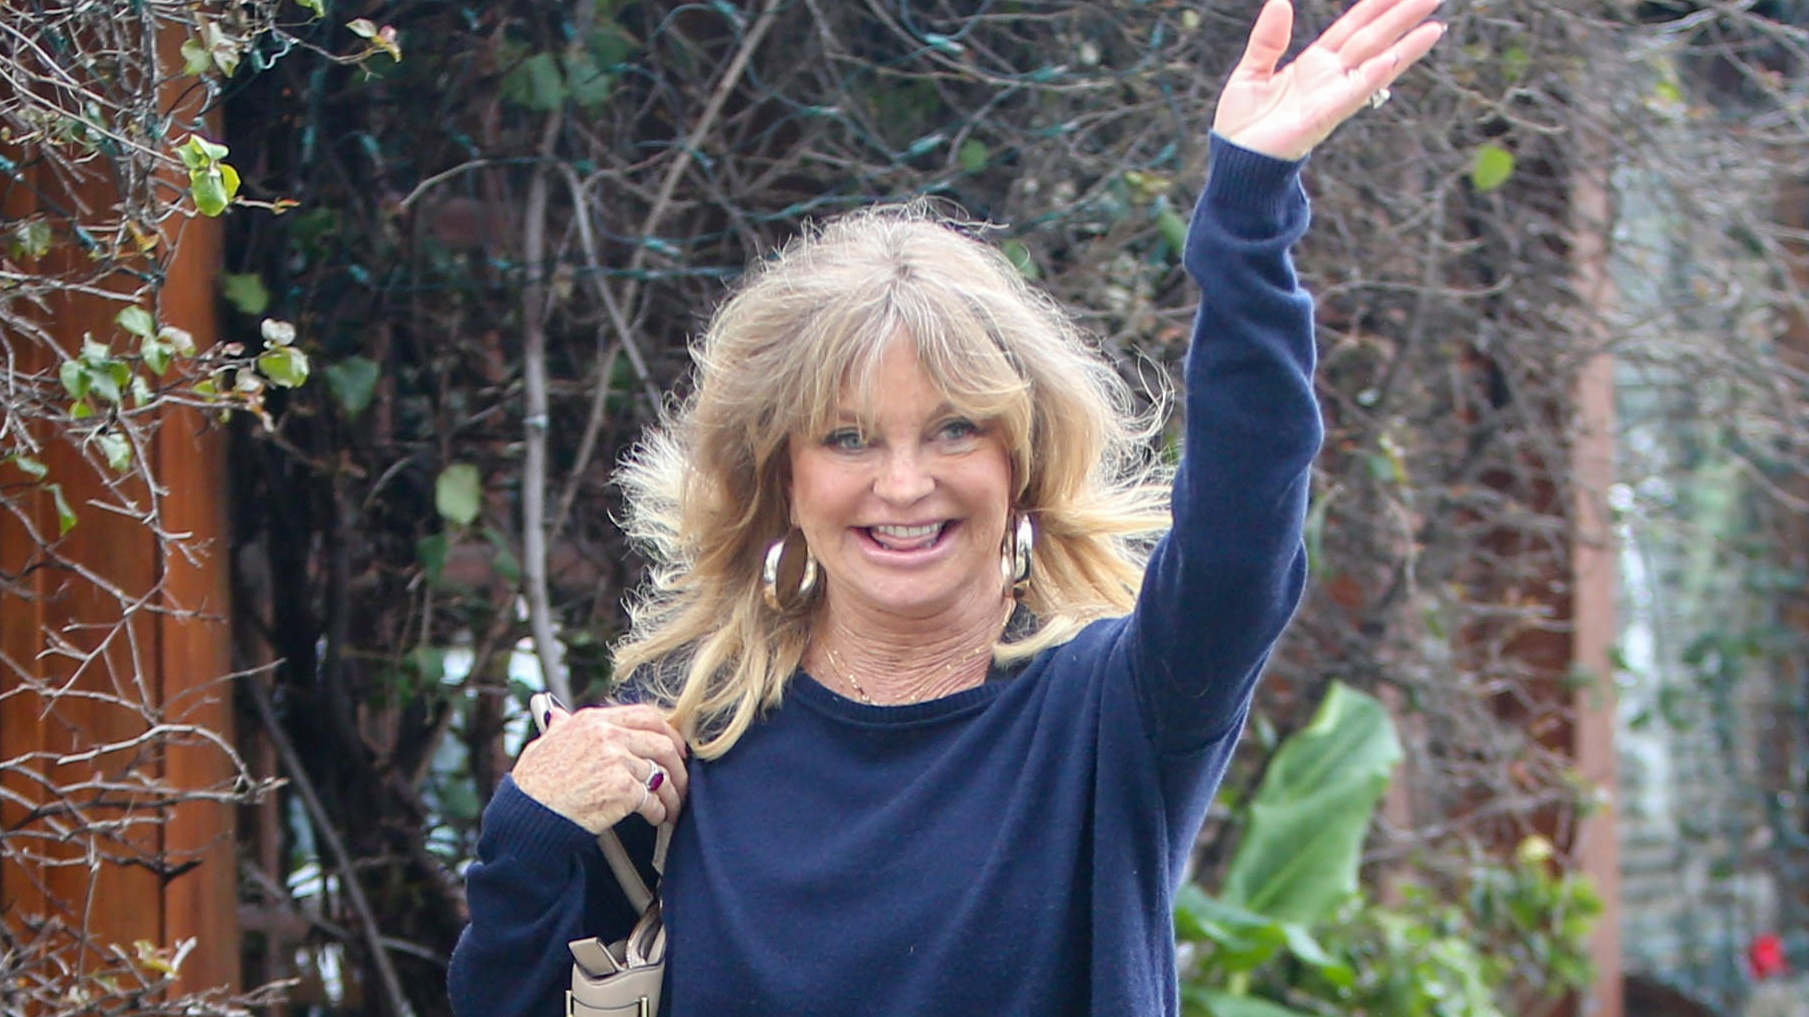 Goldie Hawn Shares Her Secret to Staying Fit and Having Fun at 74